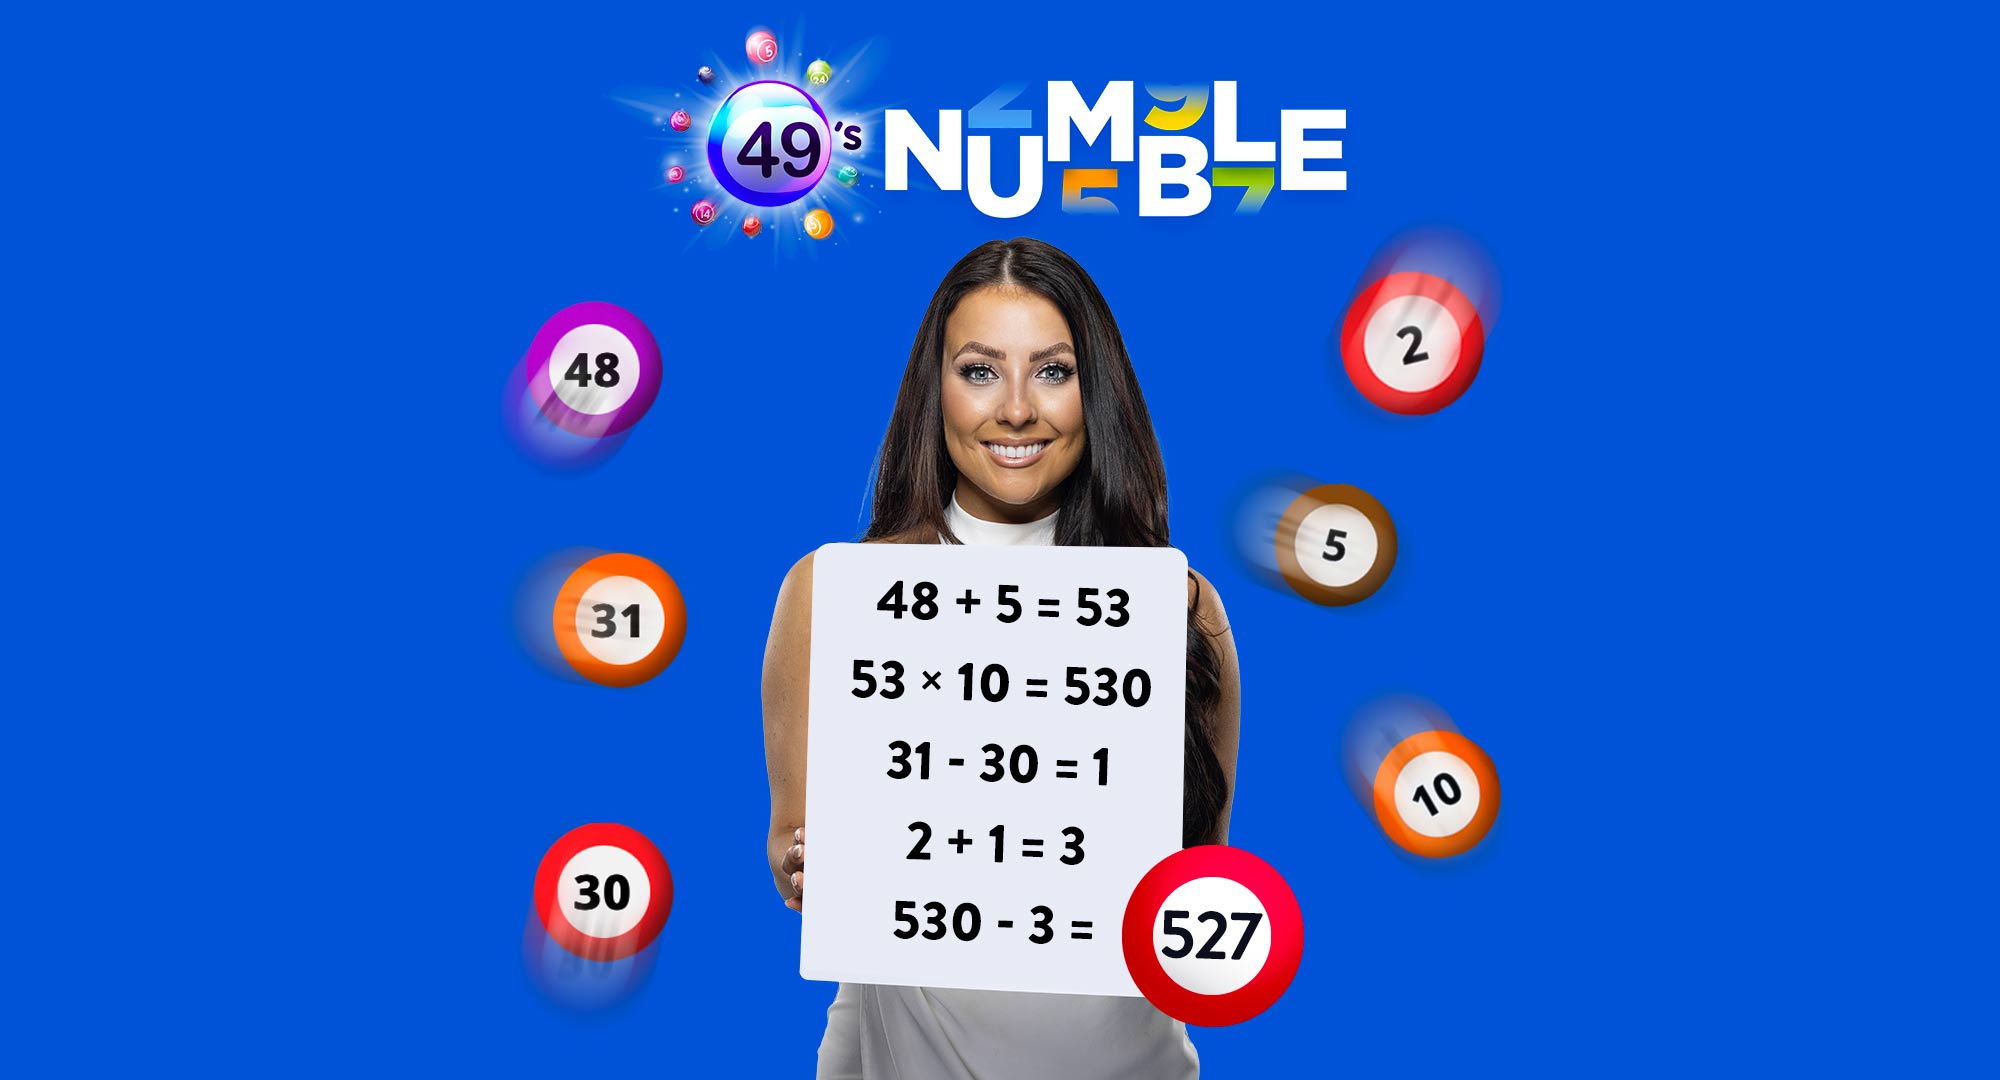 49s Numble results